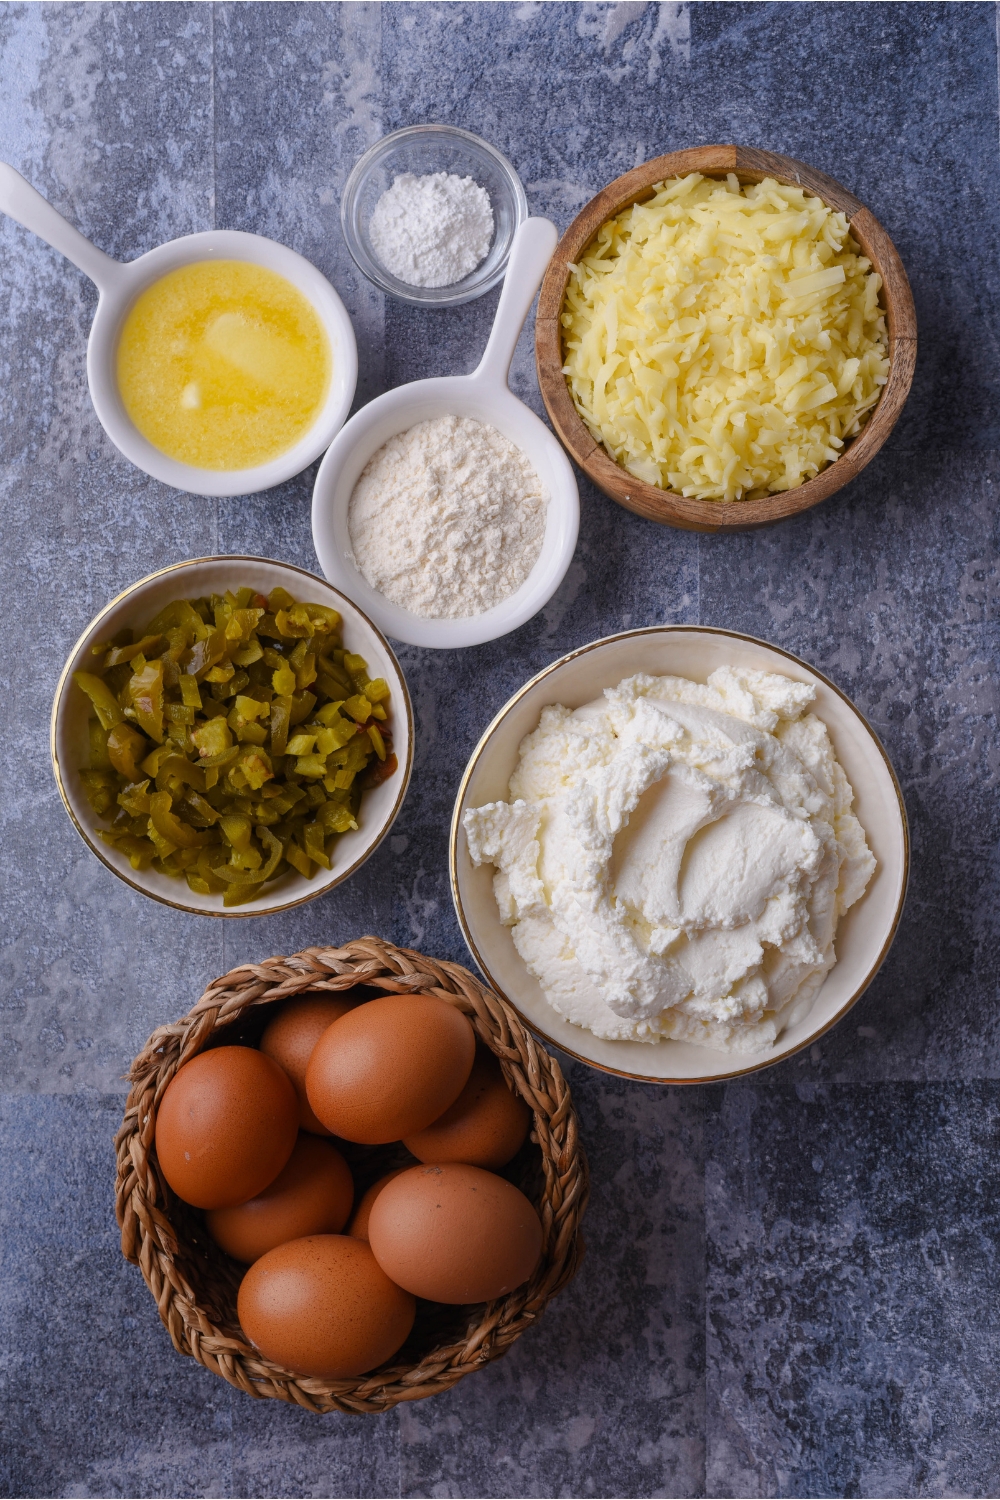 An assortment of ingredients including bowls of melted butter, diced green chilis, shredded cheese, flour, cottage cheese, and eggs.